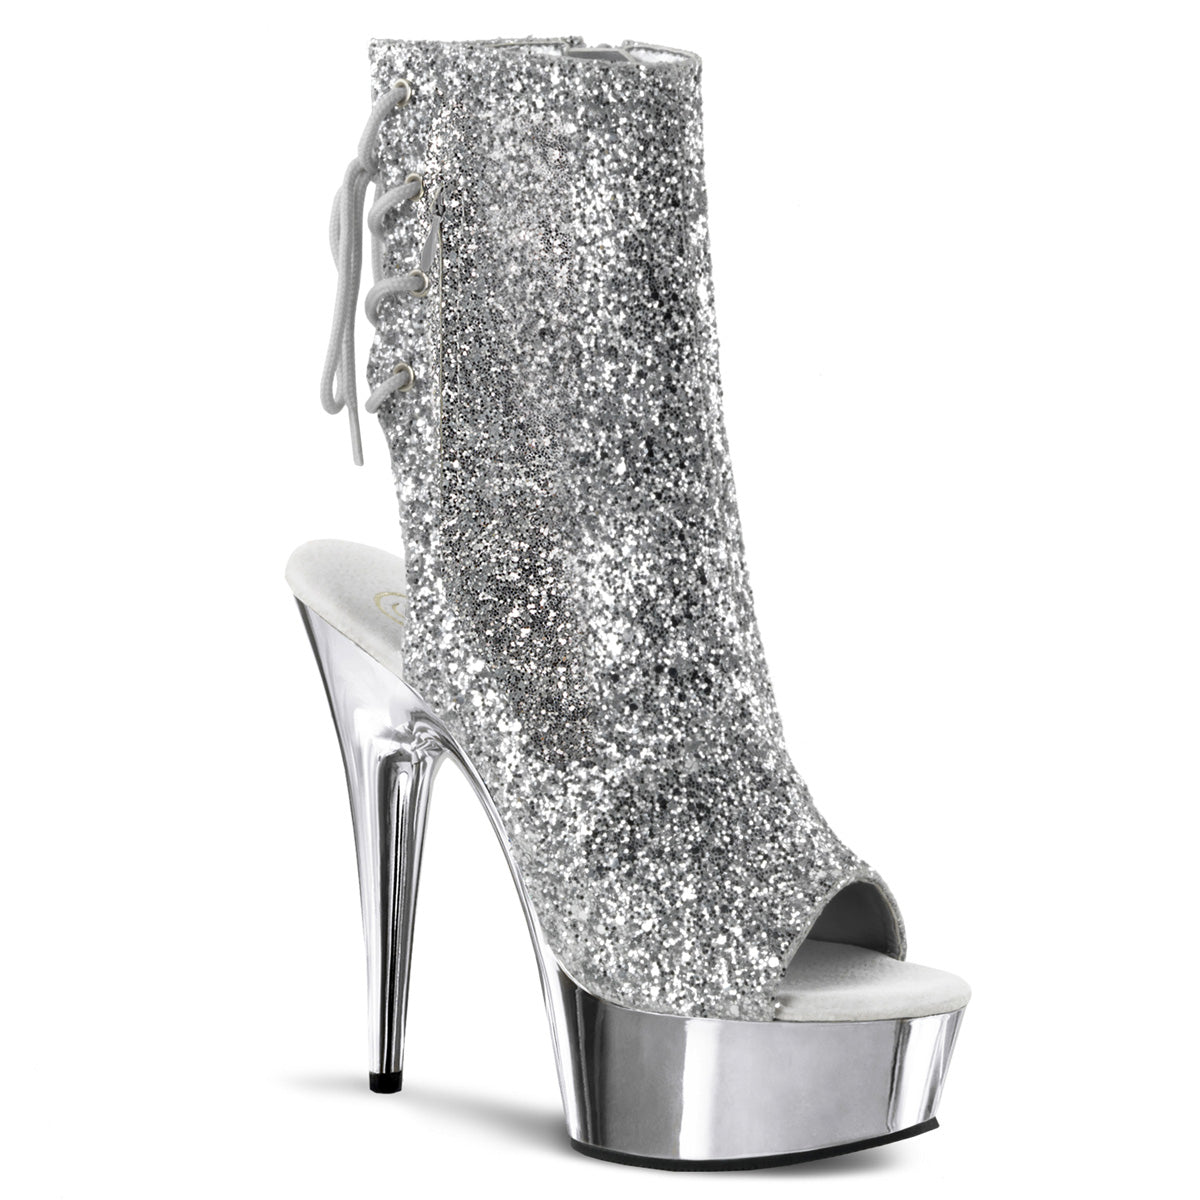 DELIGHT-1018G 6" Heel Silver Glitter Pole Dancing Platforms-Pleaser- Sexy Shoes